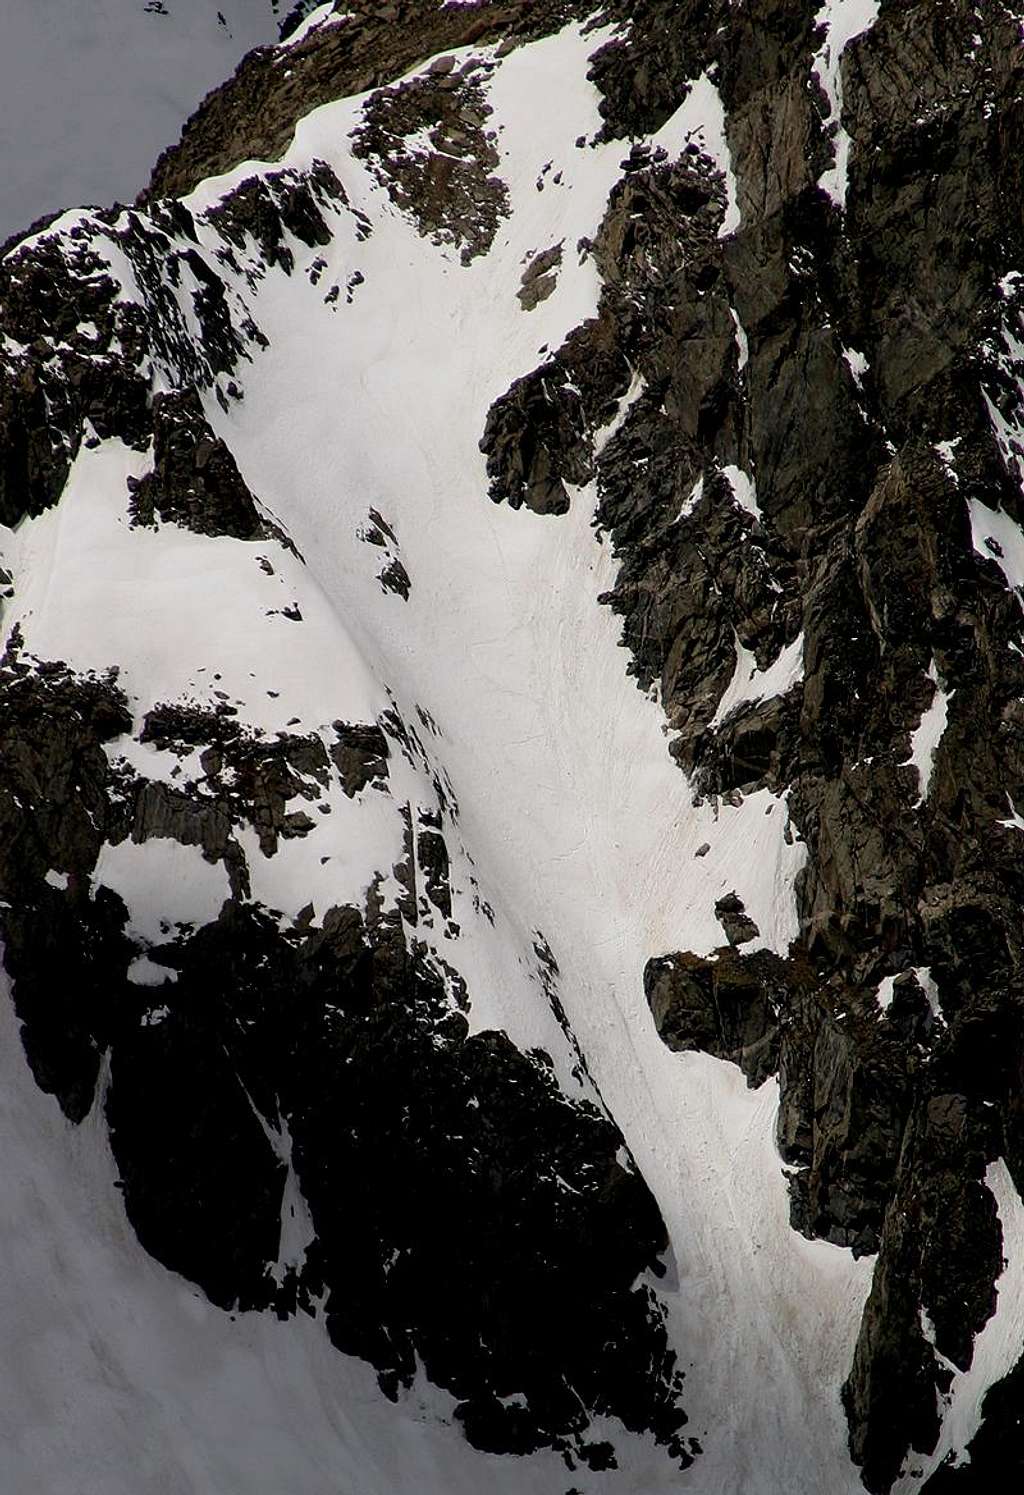 Zoom of the NE Couloir, with descent track